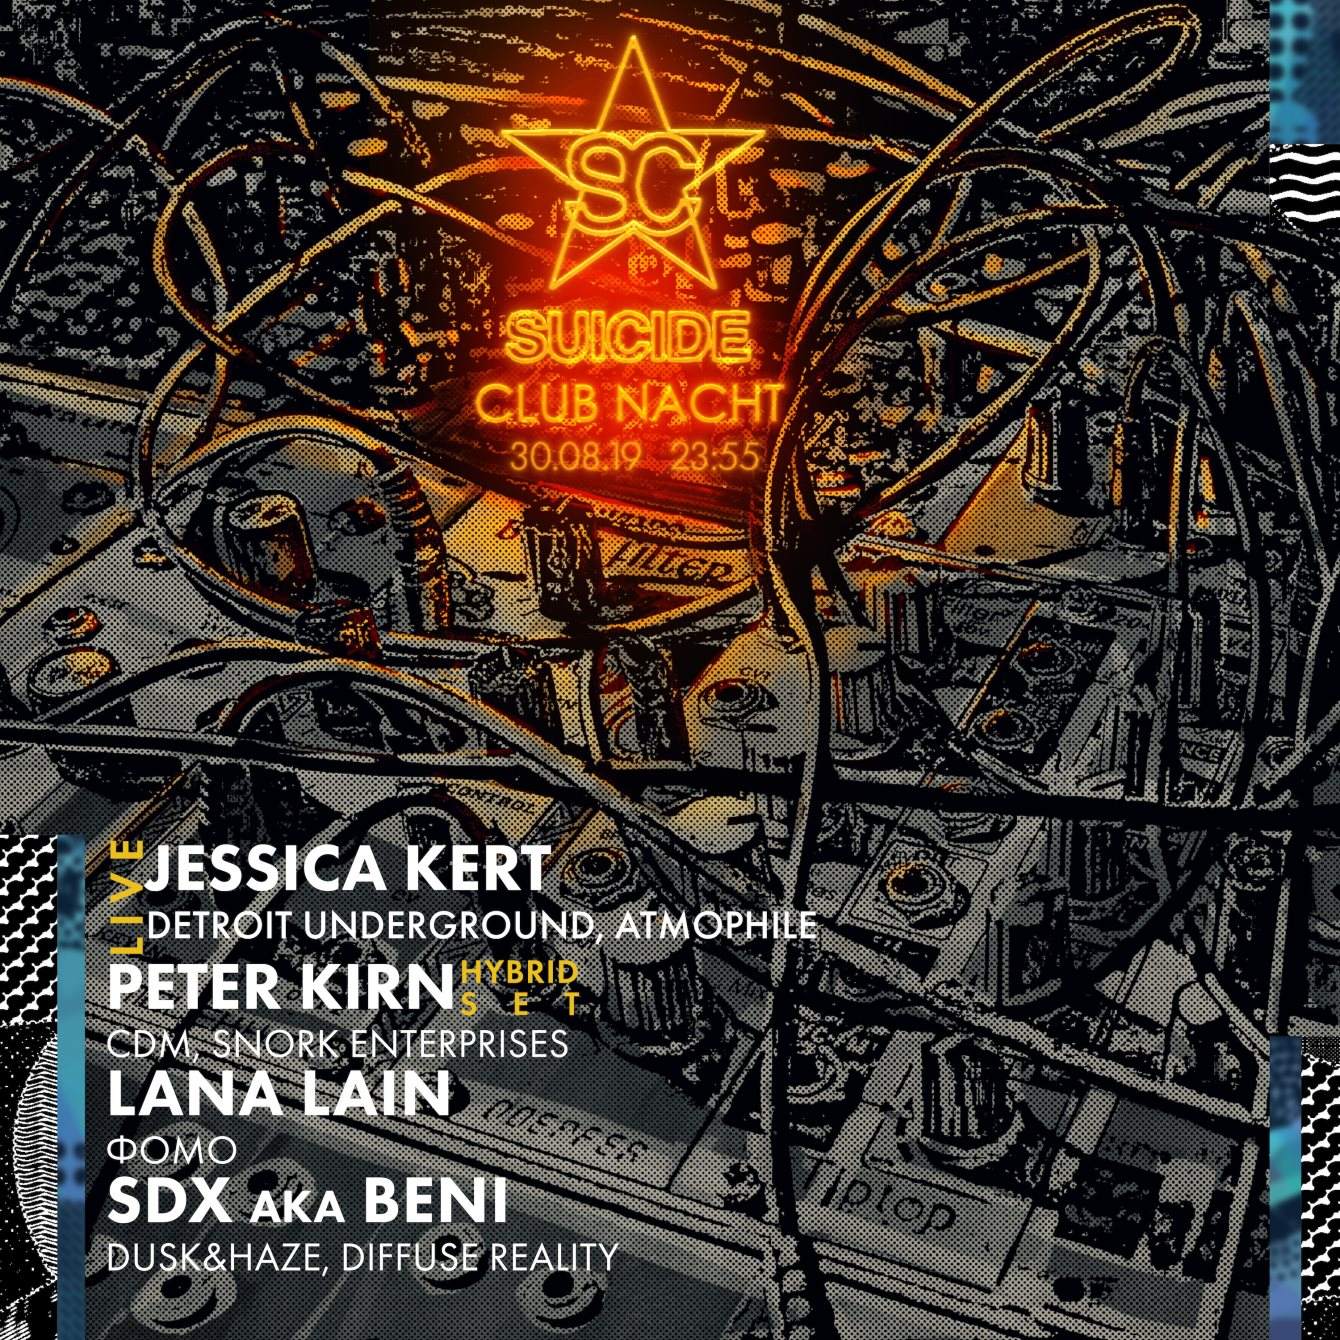 Suicide Club Nacht with Live AV by Jessica Kert and Many More, Open Air + Club - フライヤー裏